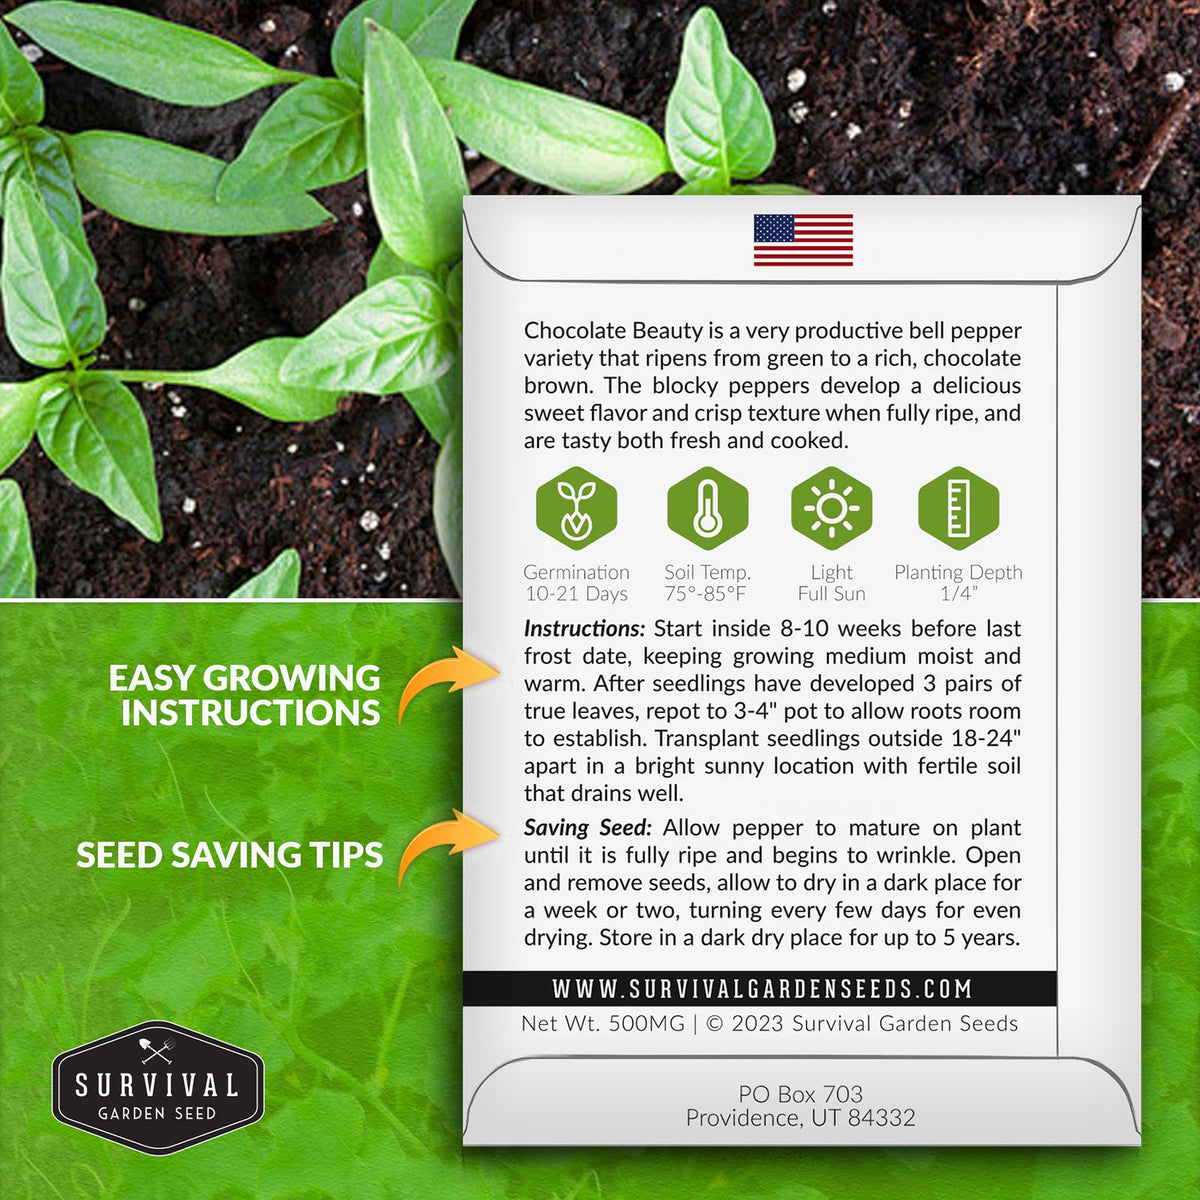 Chocolate Beauty Pepper planting instructions